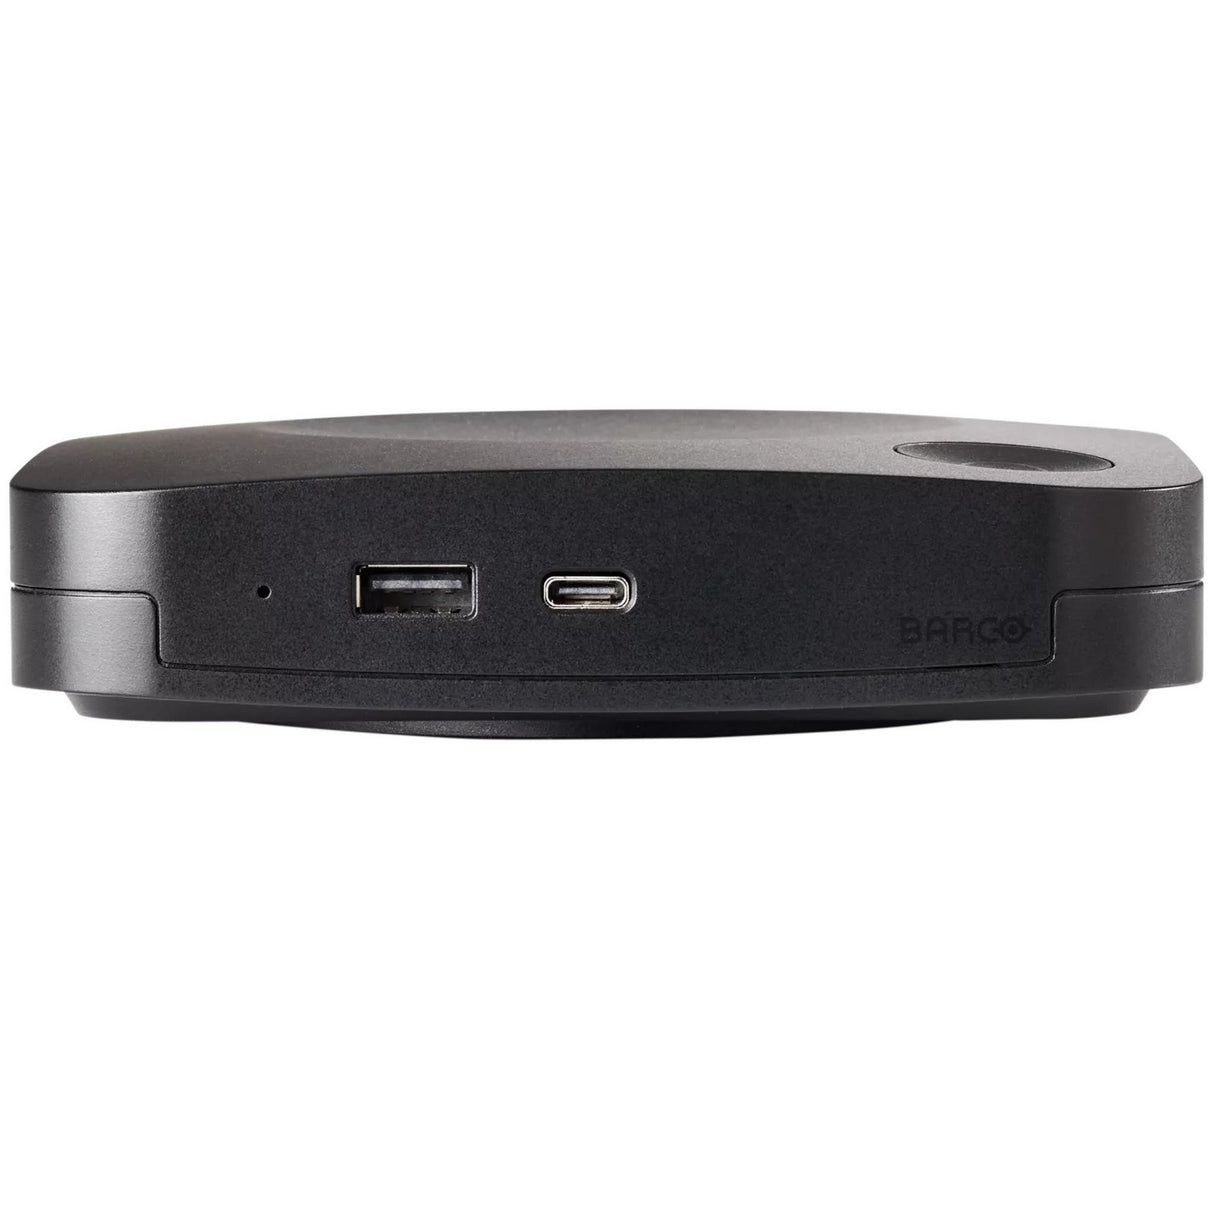 Barco ClickShare C‑5 Gen 2 Wireless Conferencing System